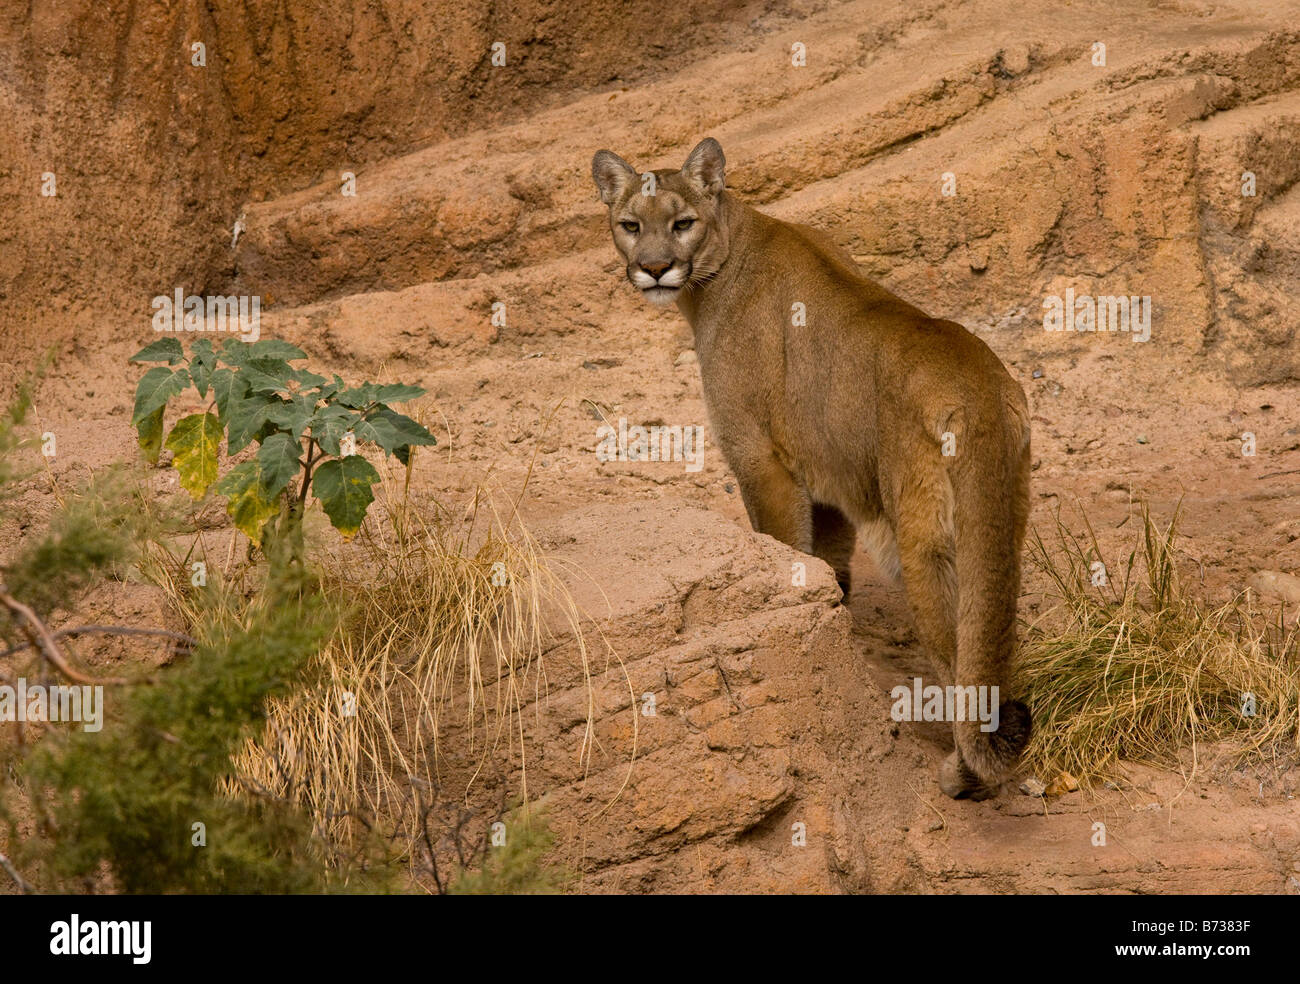 Cougar Puma concolor also known as puma mountain lion or panther Arizona  Stock Photo - Alamy